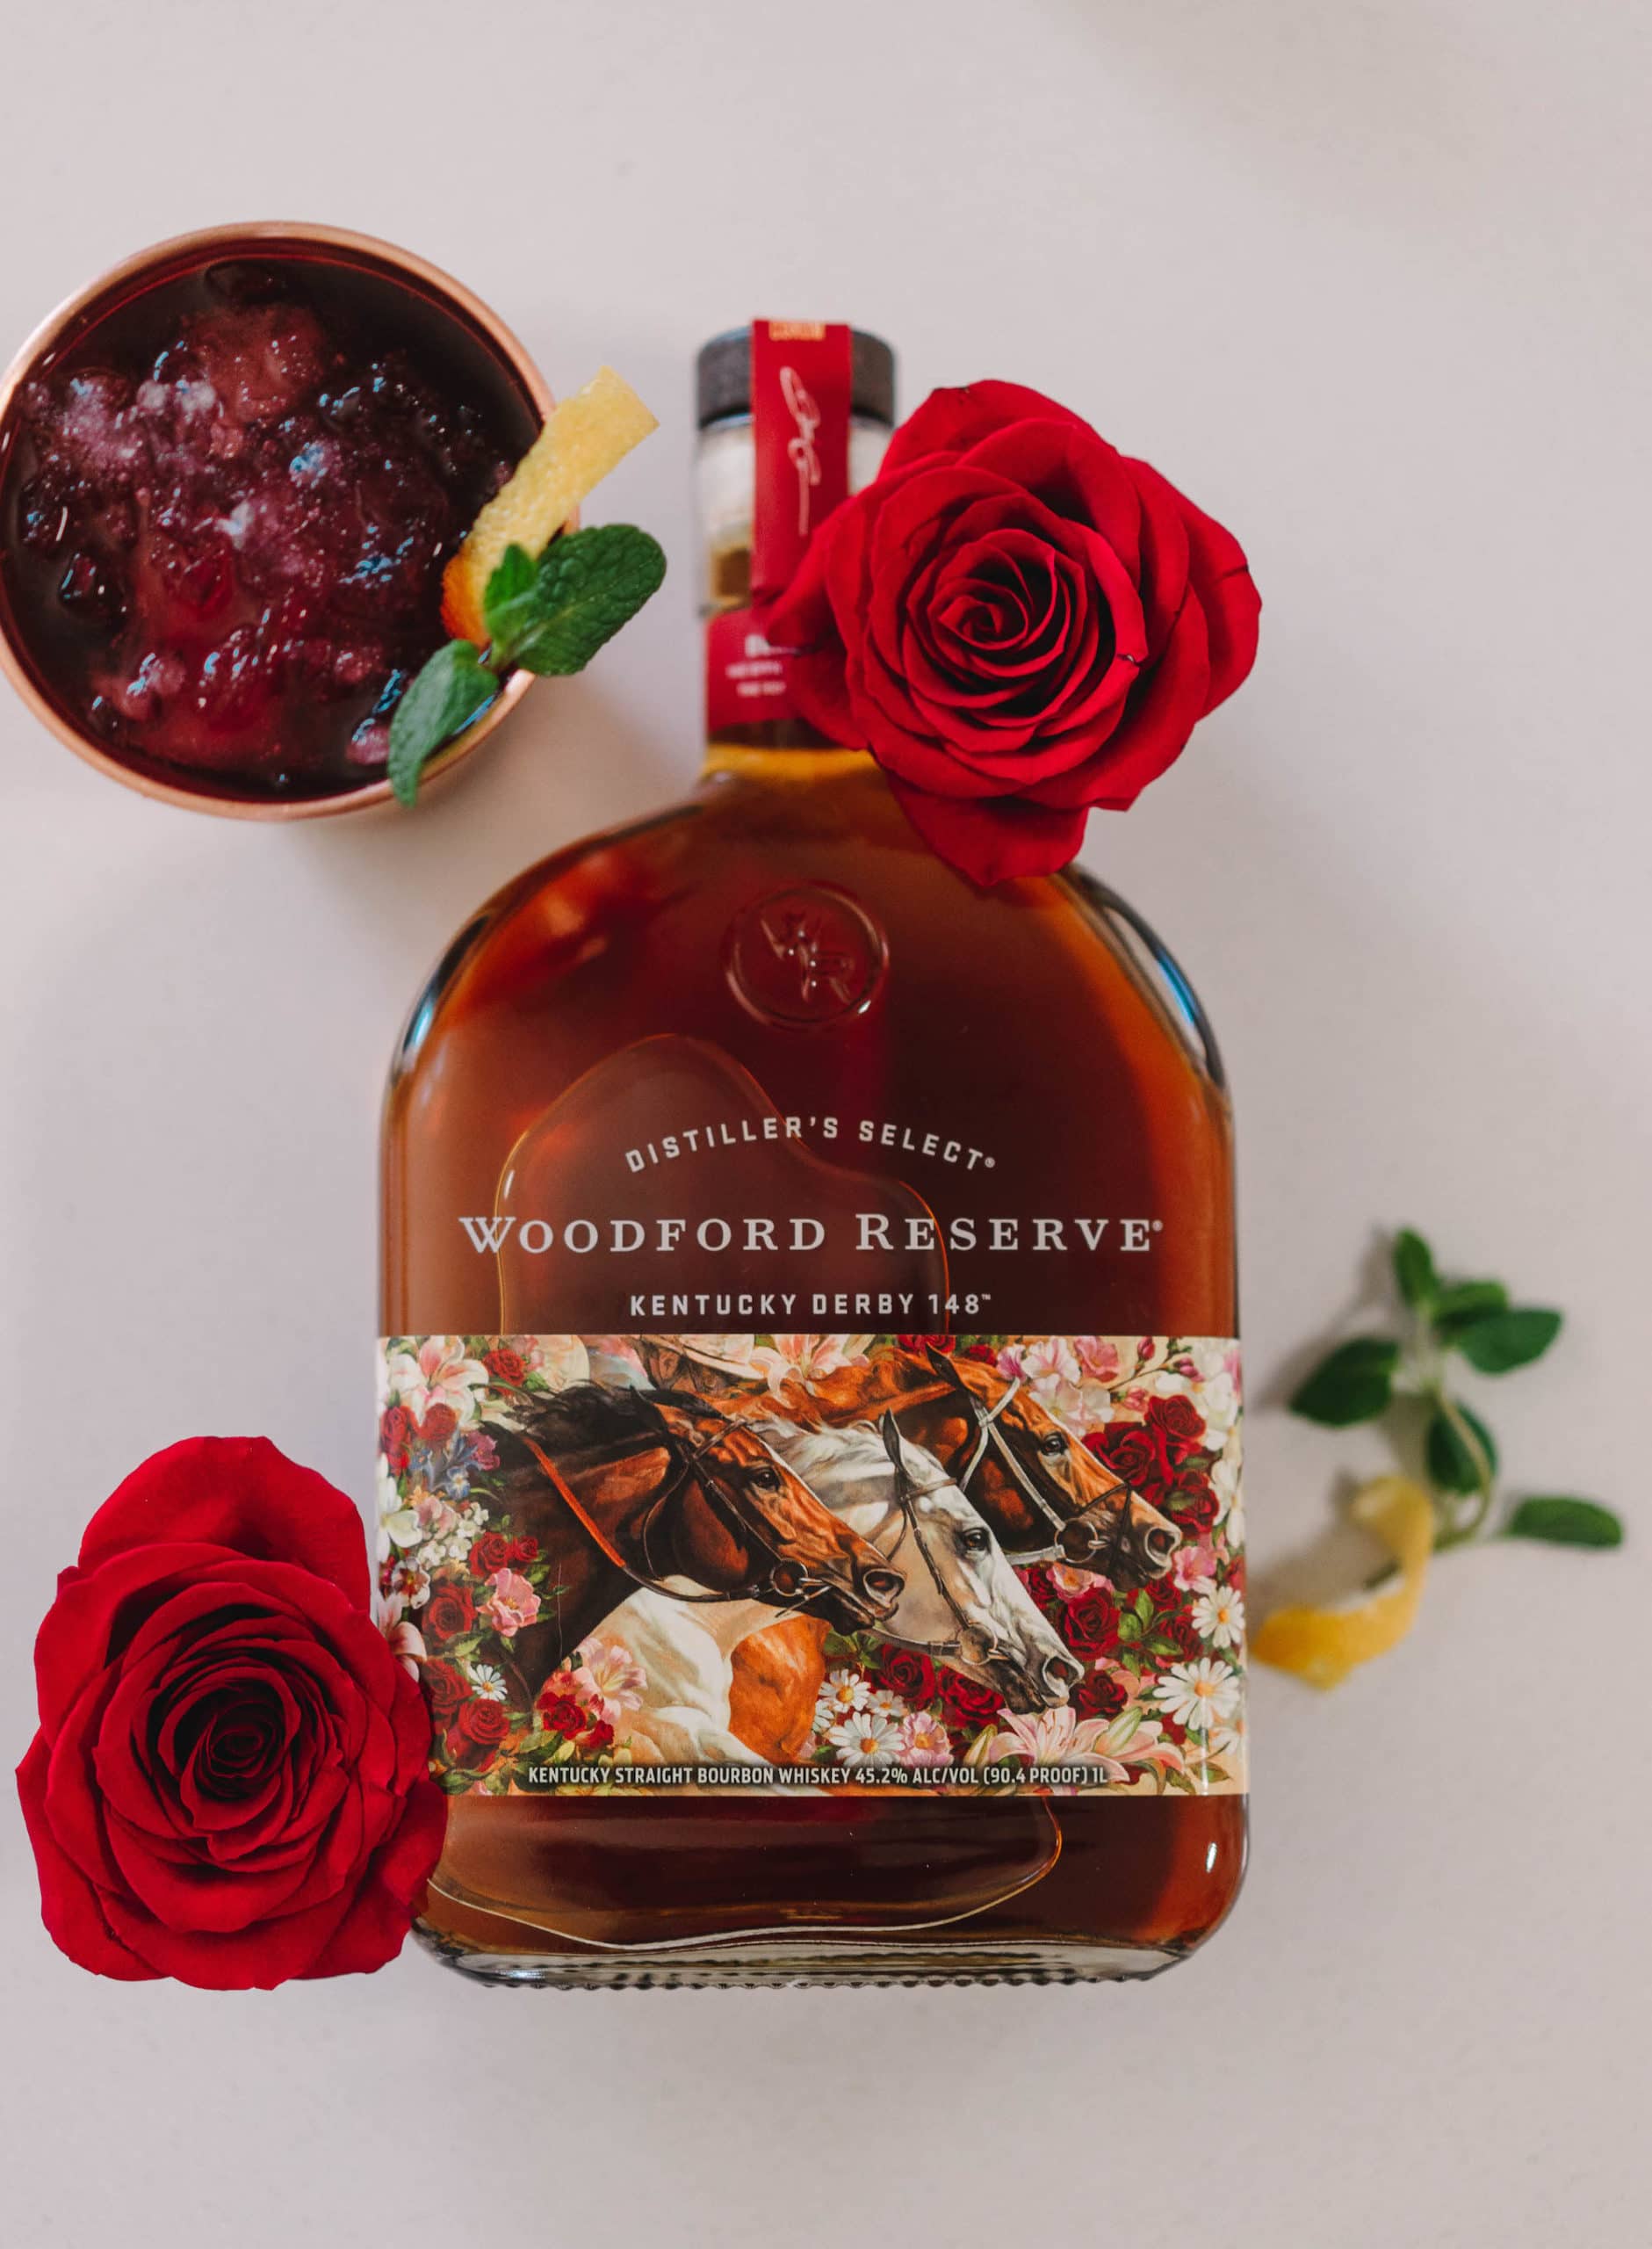 Woodford Reserve Releases 2022 Kentucky Derby Bottle Featuring Artwork